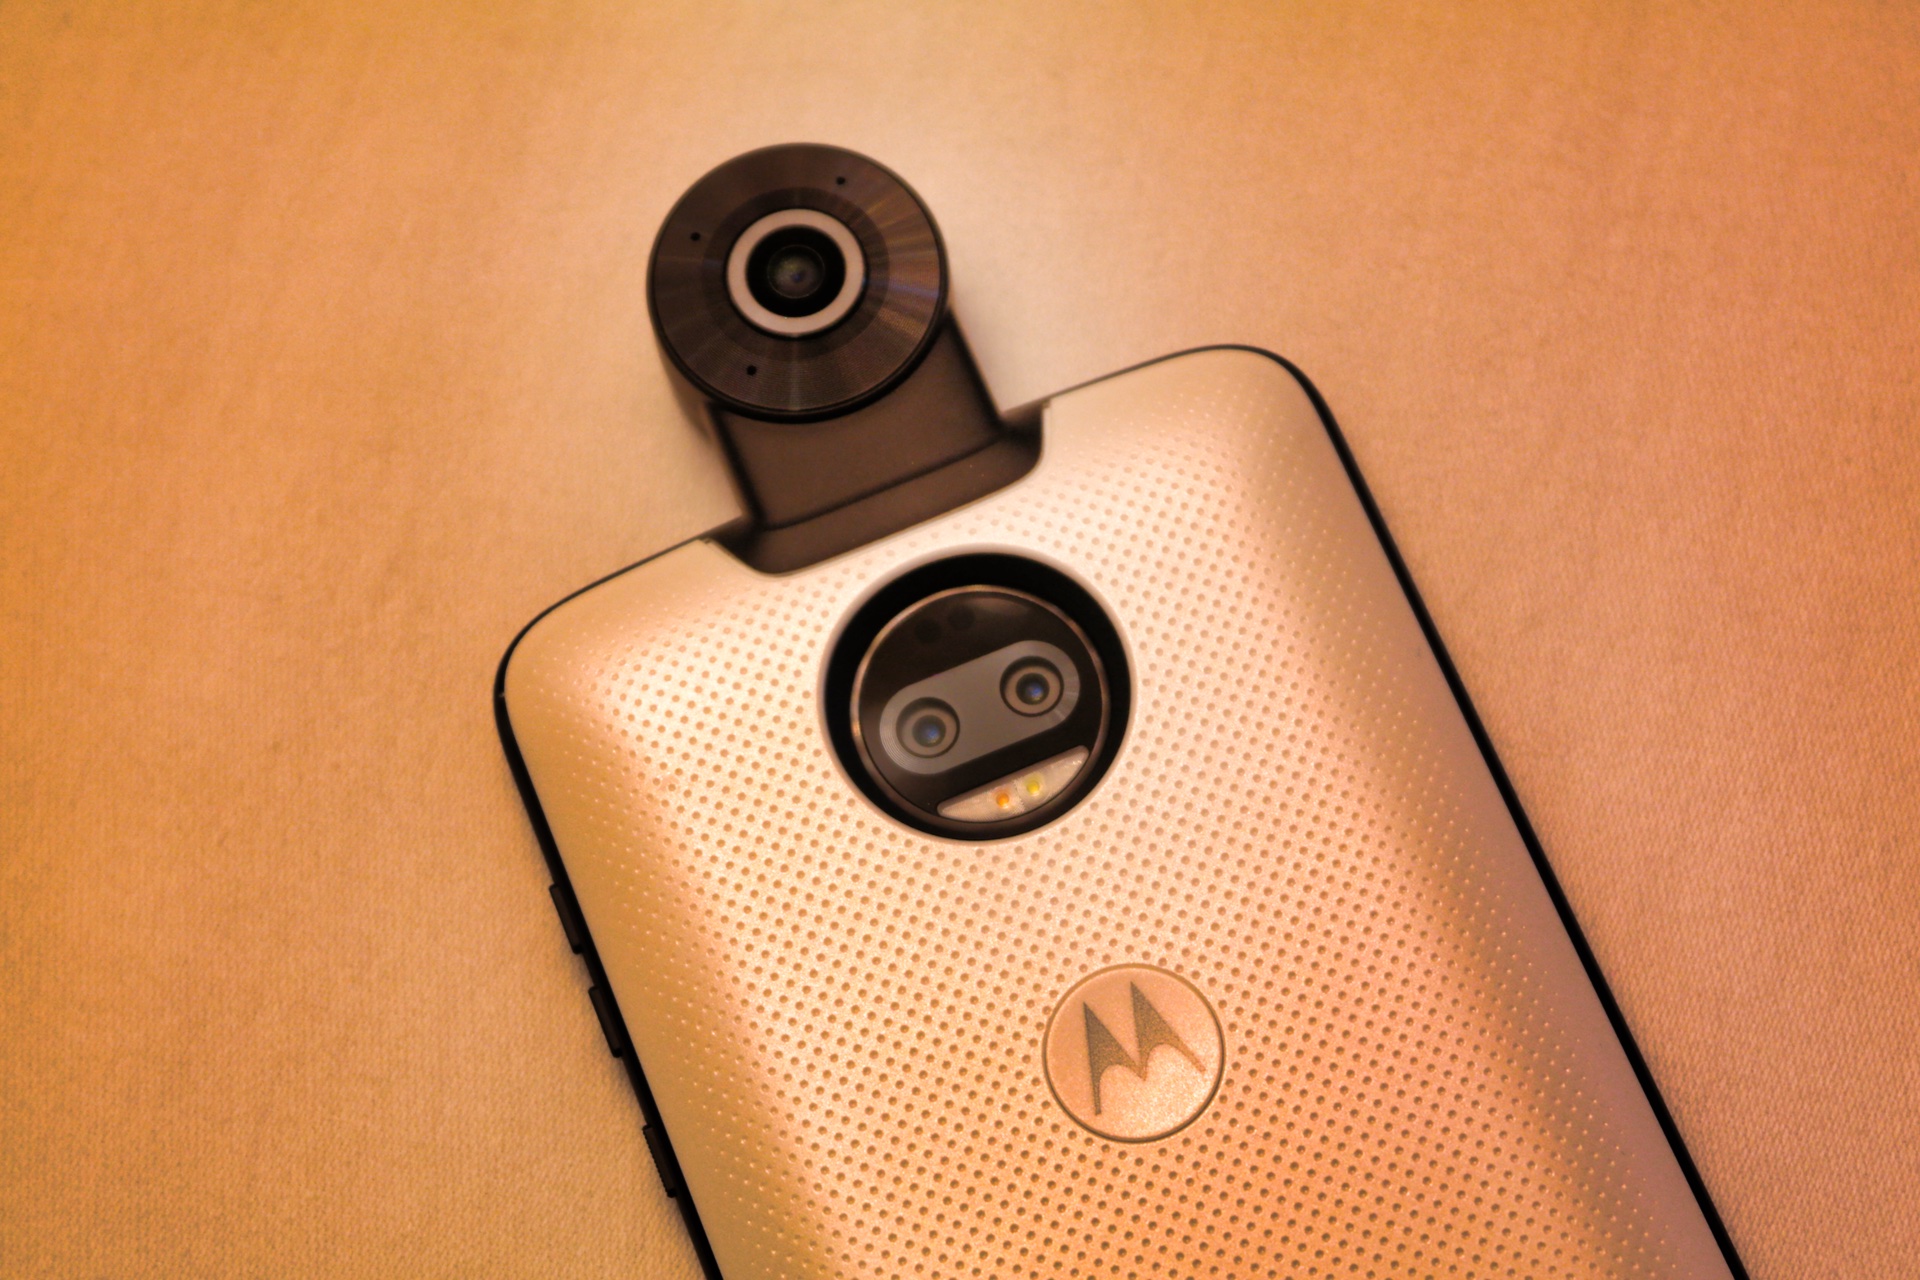 Take pictures with the Moto 360 Camera